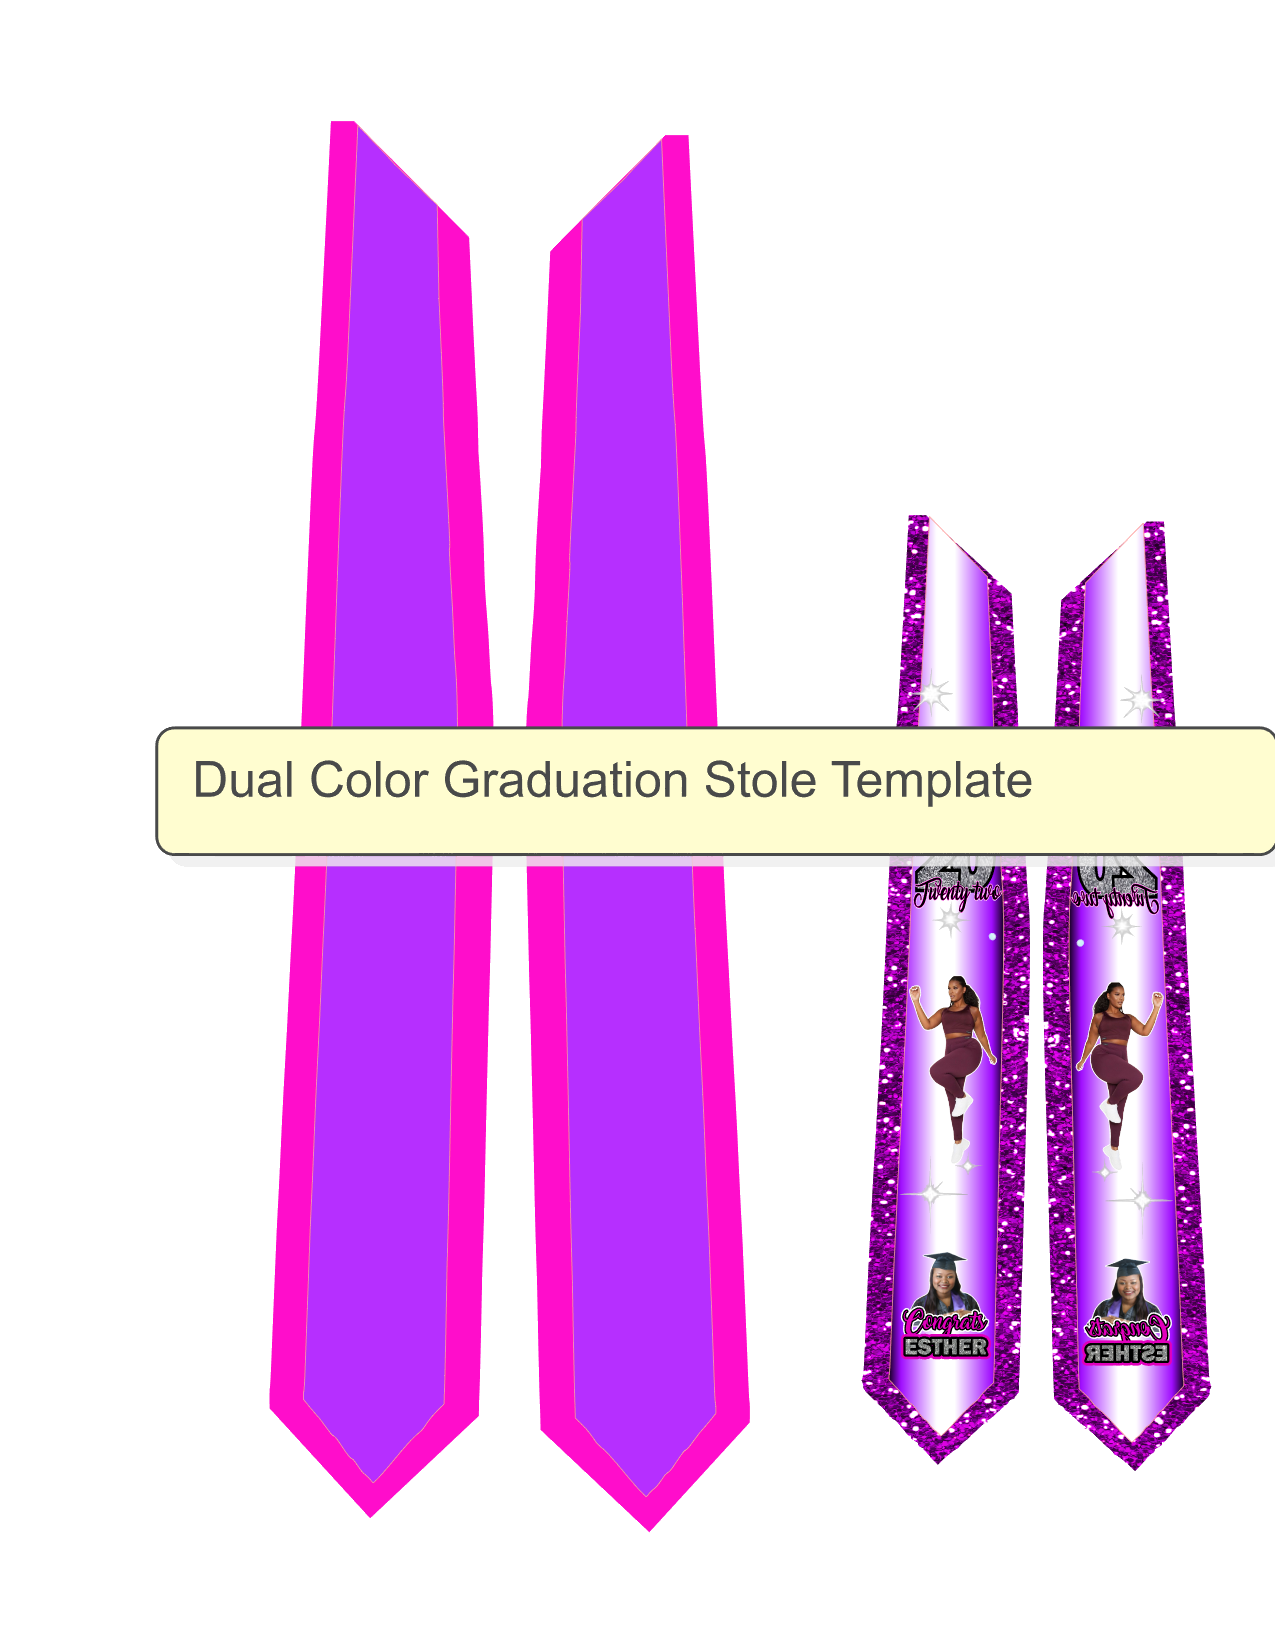 Dual Color Graduation Stole Templates, SVG and PNG files